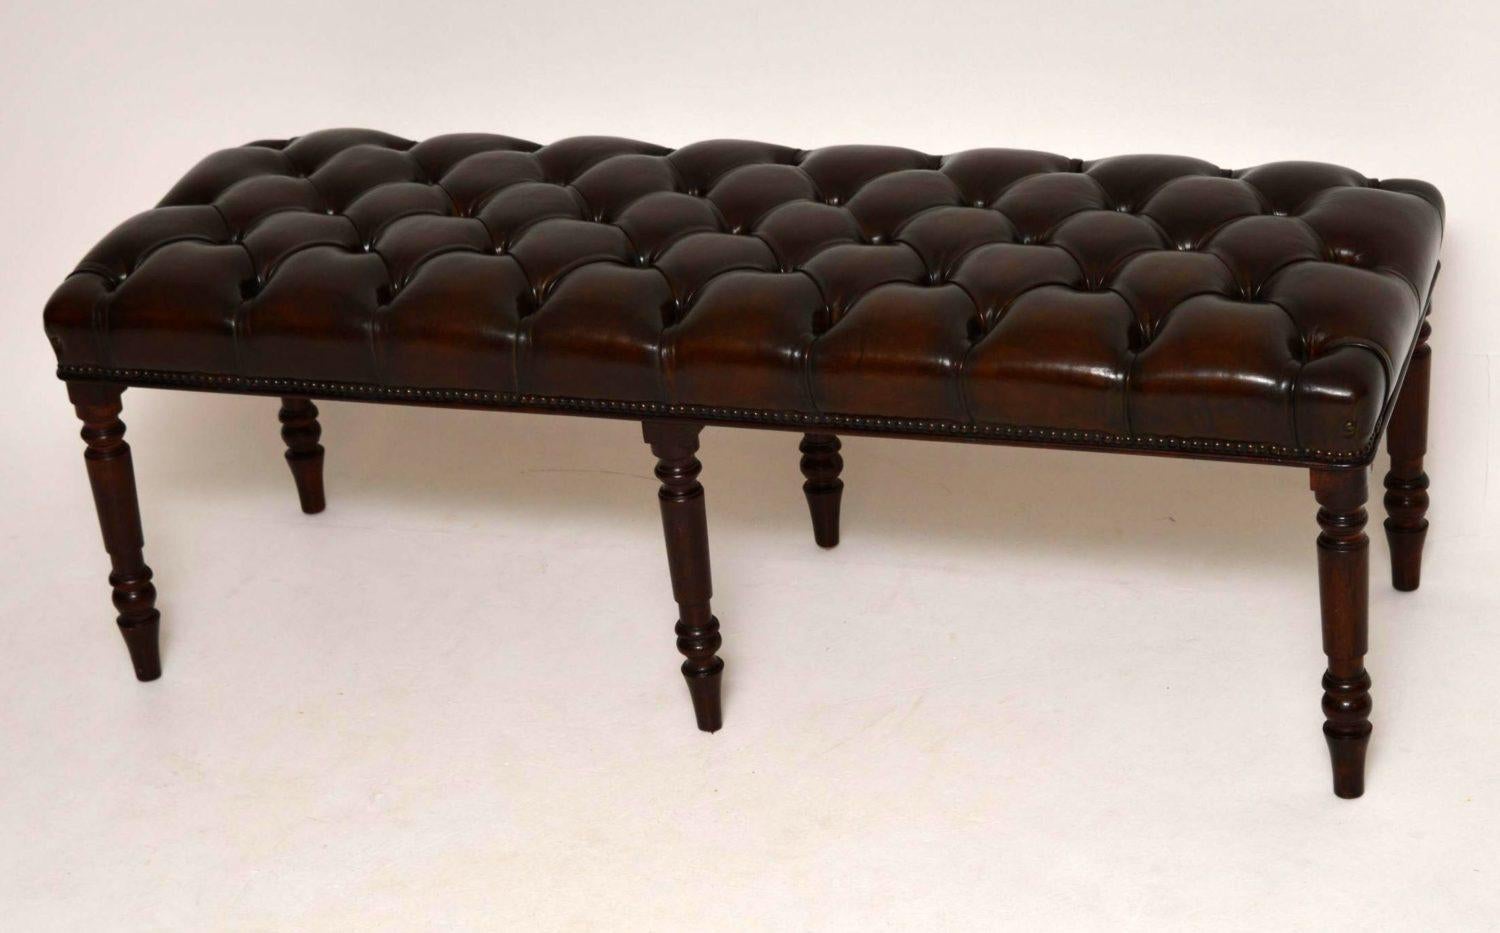 Antique deep buttoned leather upholstered stool on a mahogany frame with six turned mahogany legs. This stool has some age, but I believe it’s been adapted. The leather seat which has lots of character is deep buttoned and hand tacked onto the